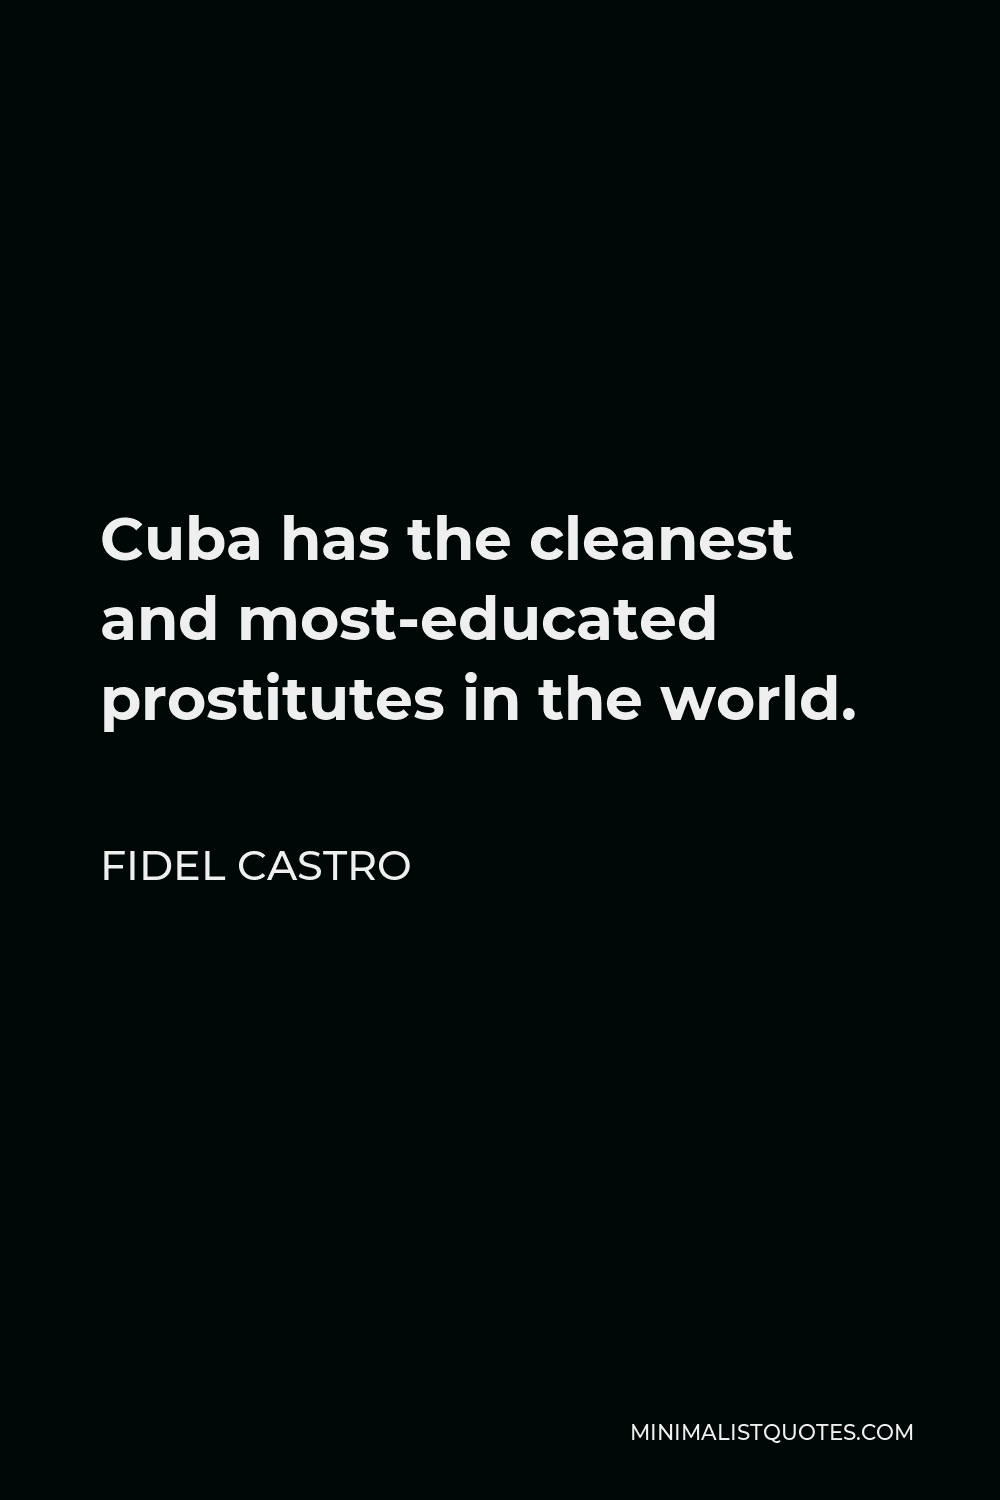 Fidel Castro Quote - Cuba has the cleanest and most-educated prostitutes in the world.